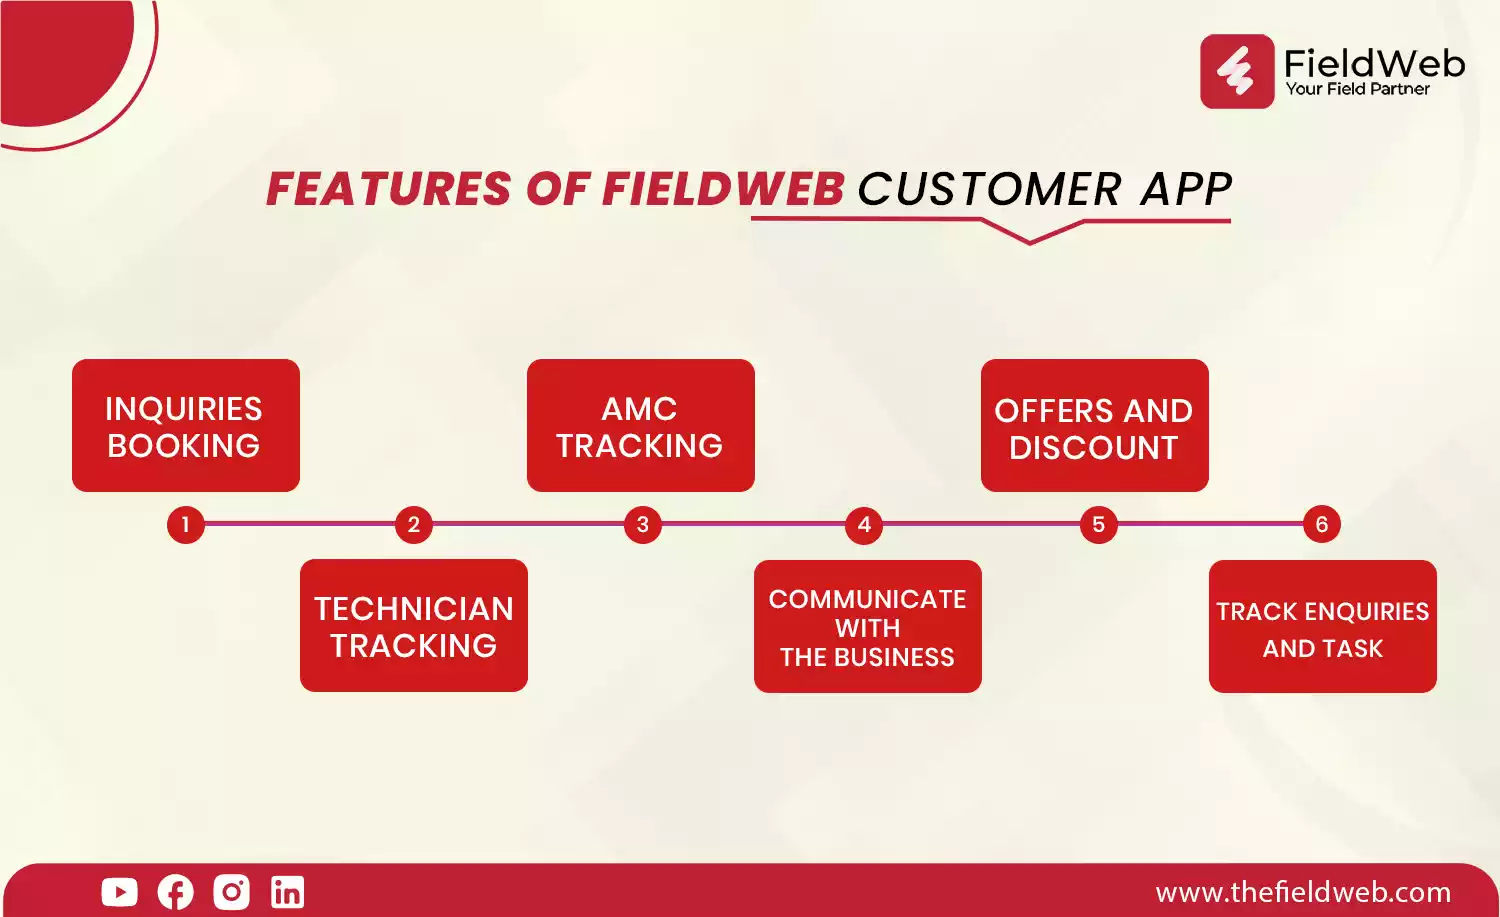 image is displaying 6 main features of the fieldweb customer app